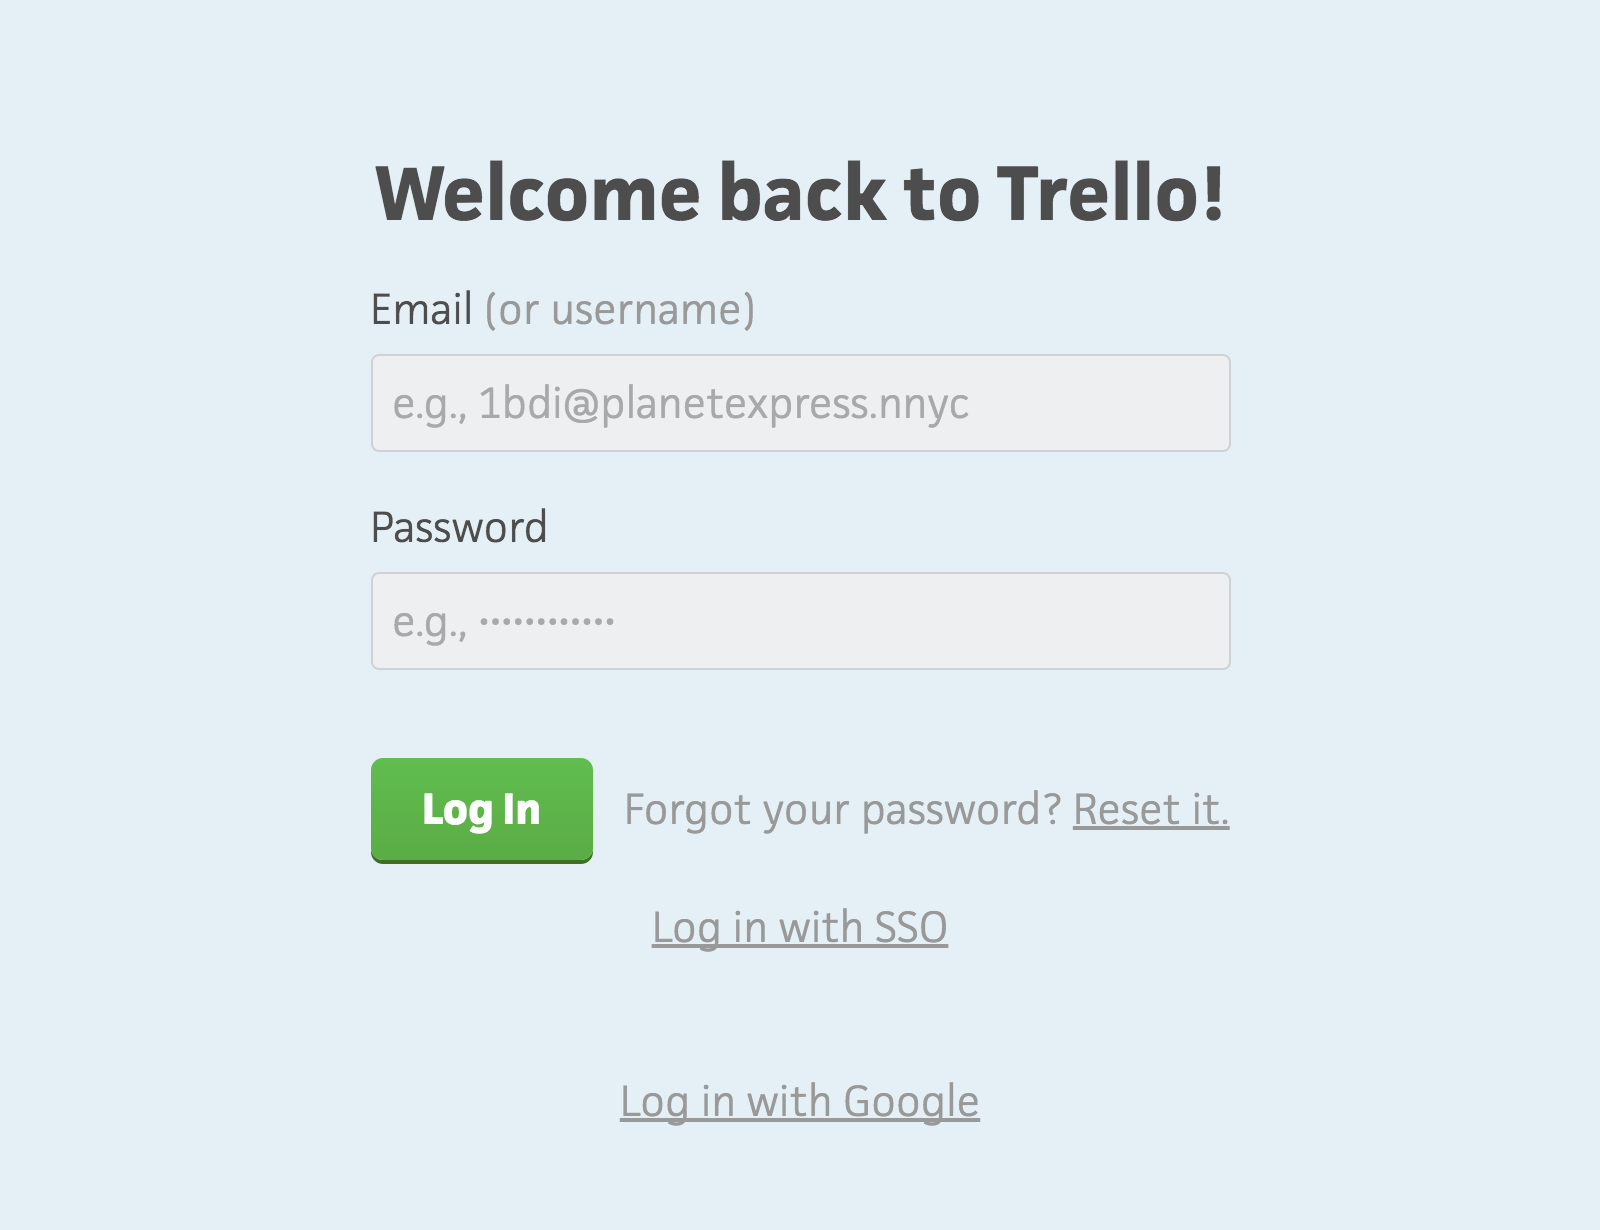 Welcome back to Trello